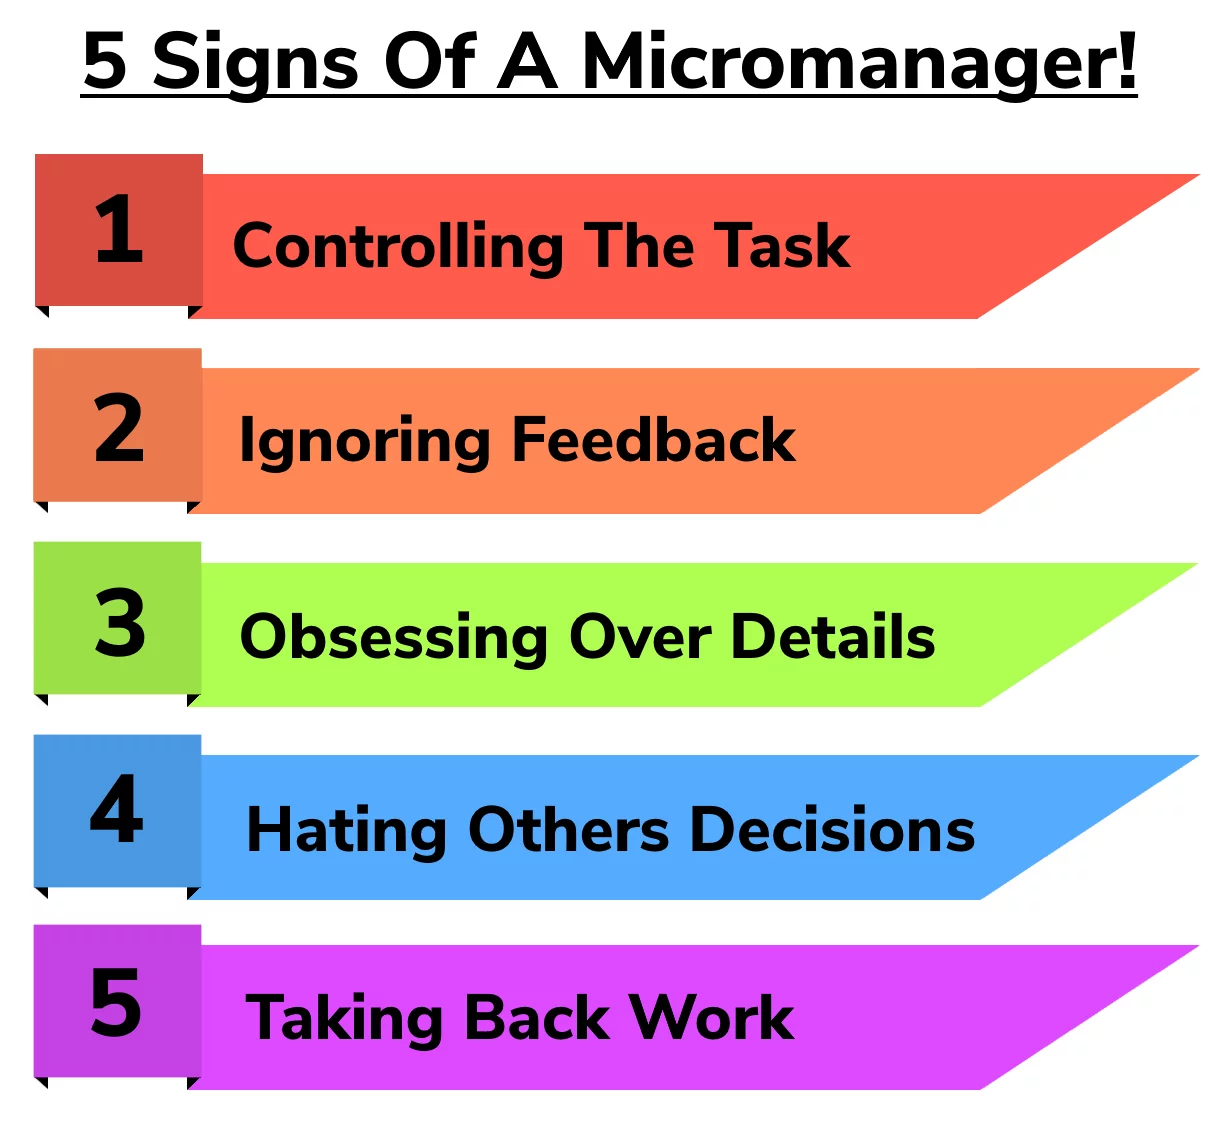 Signs of a micromanager